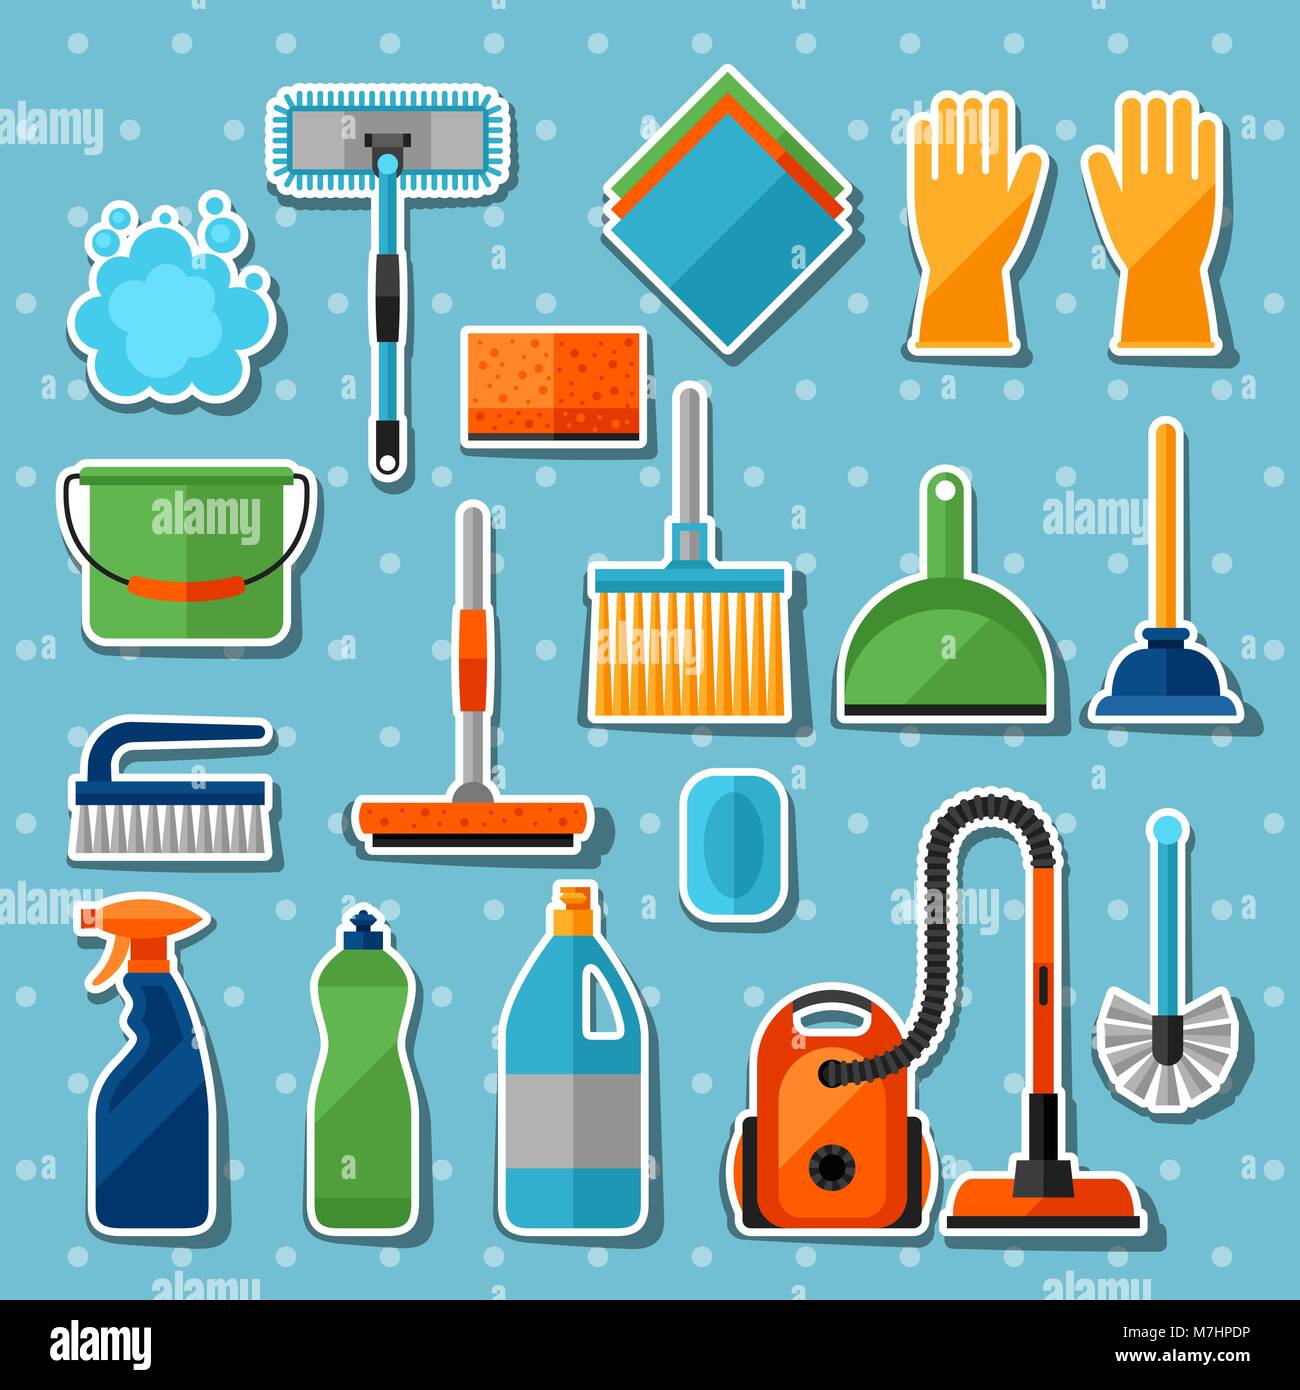 https://c8.alamy.com/comp/M7HPDP/housekeeping-cleaning-sticker-icons-set-image-can-be-used-on-banners-M7HPDP.jpg